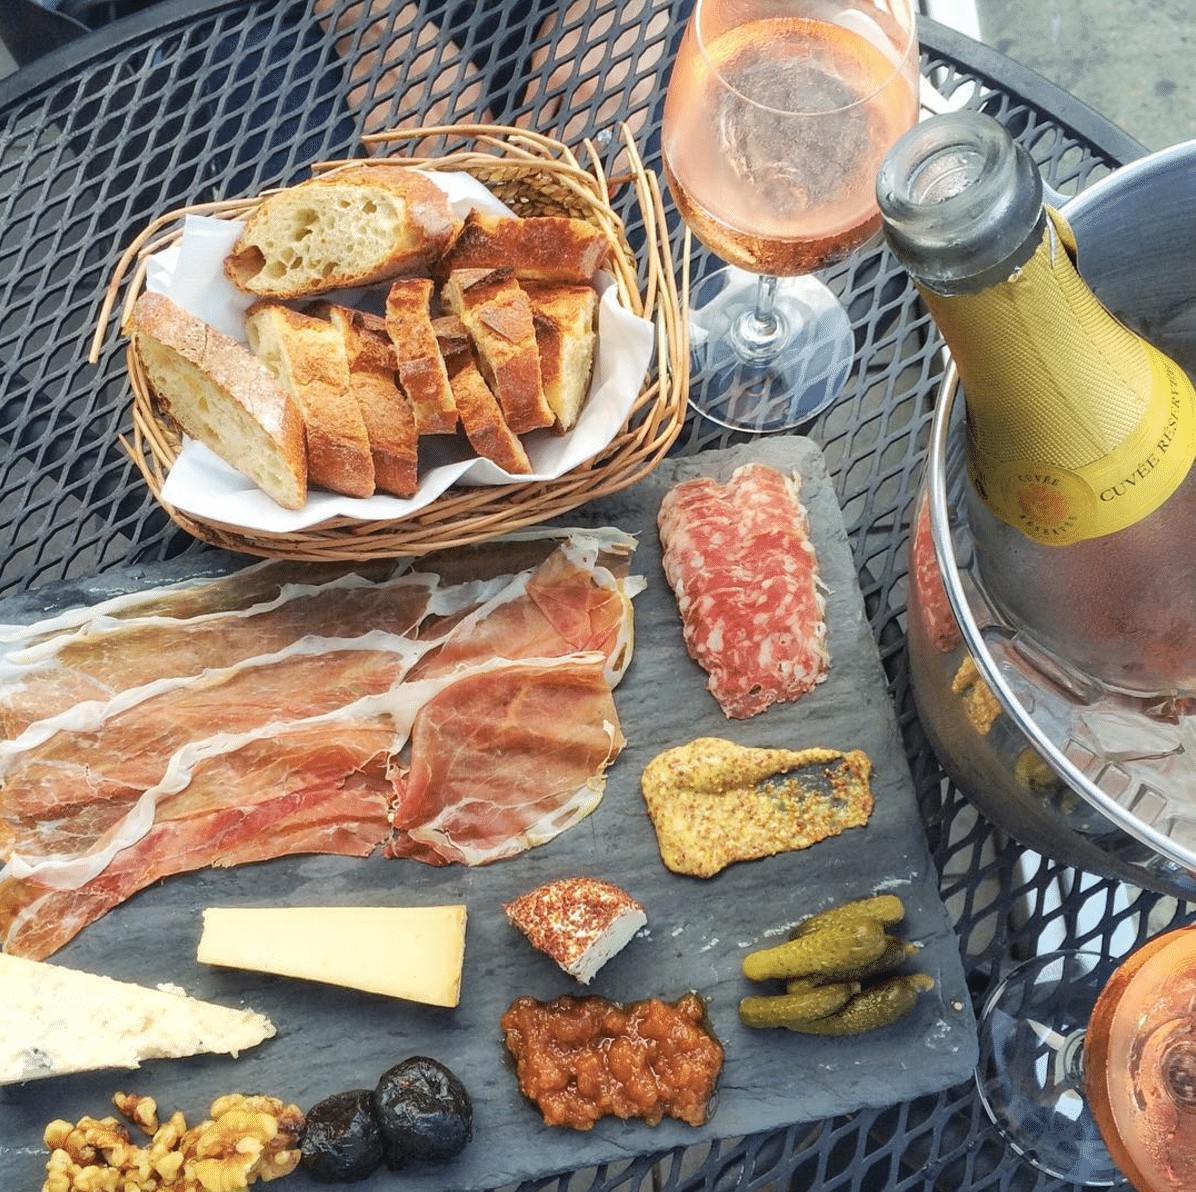 outdoor table with a Cheese plate next to a bucket of sparkling wine.